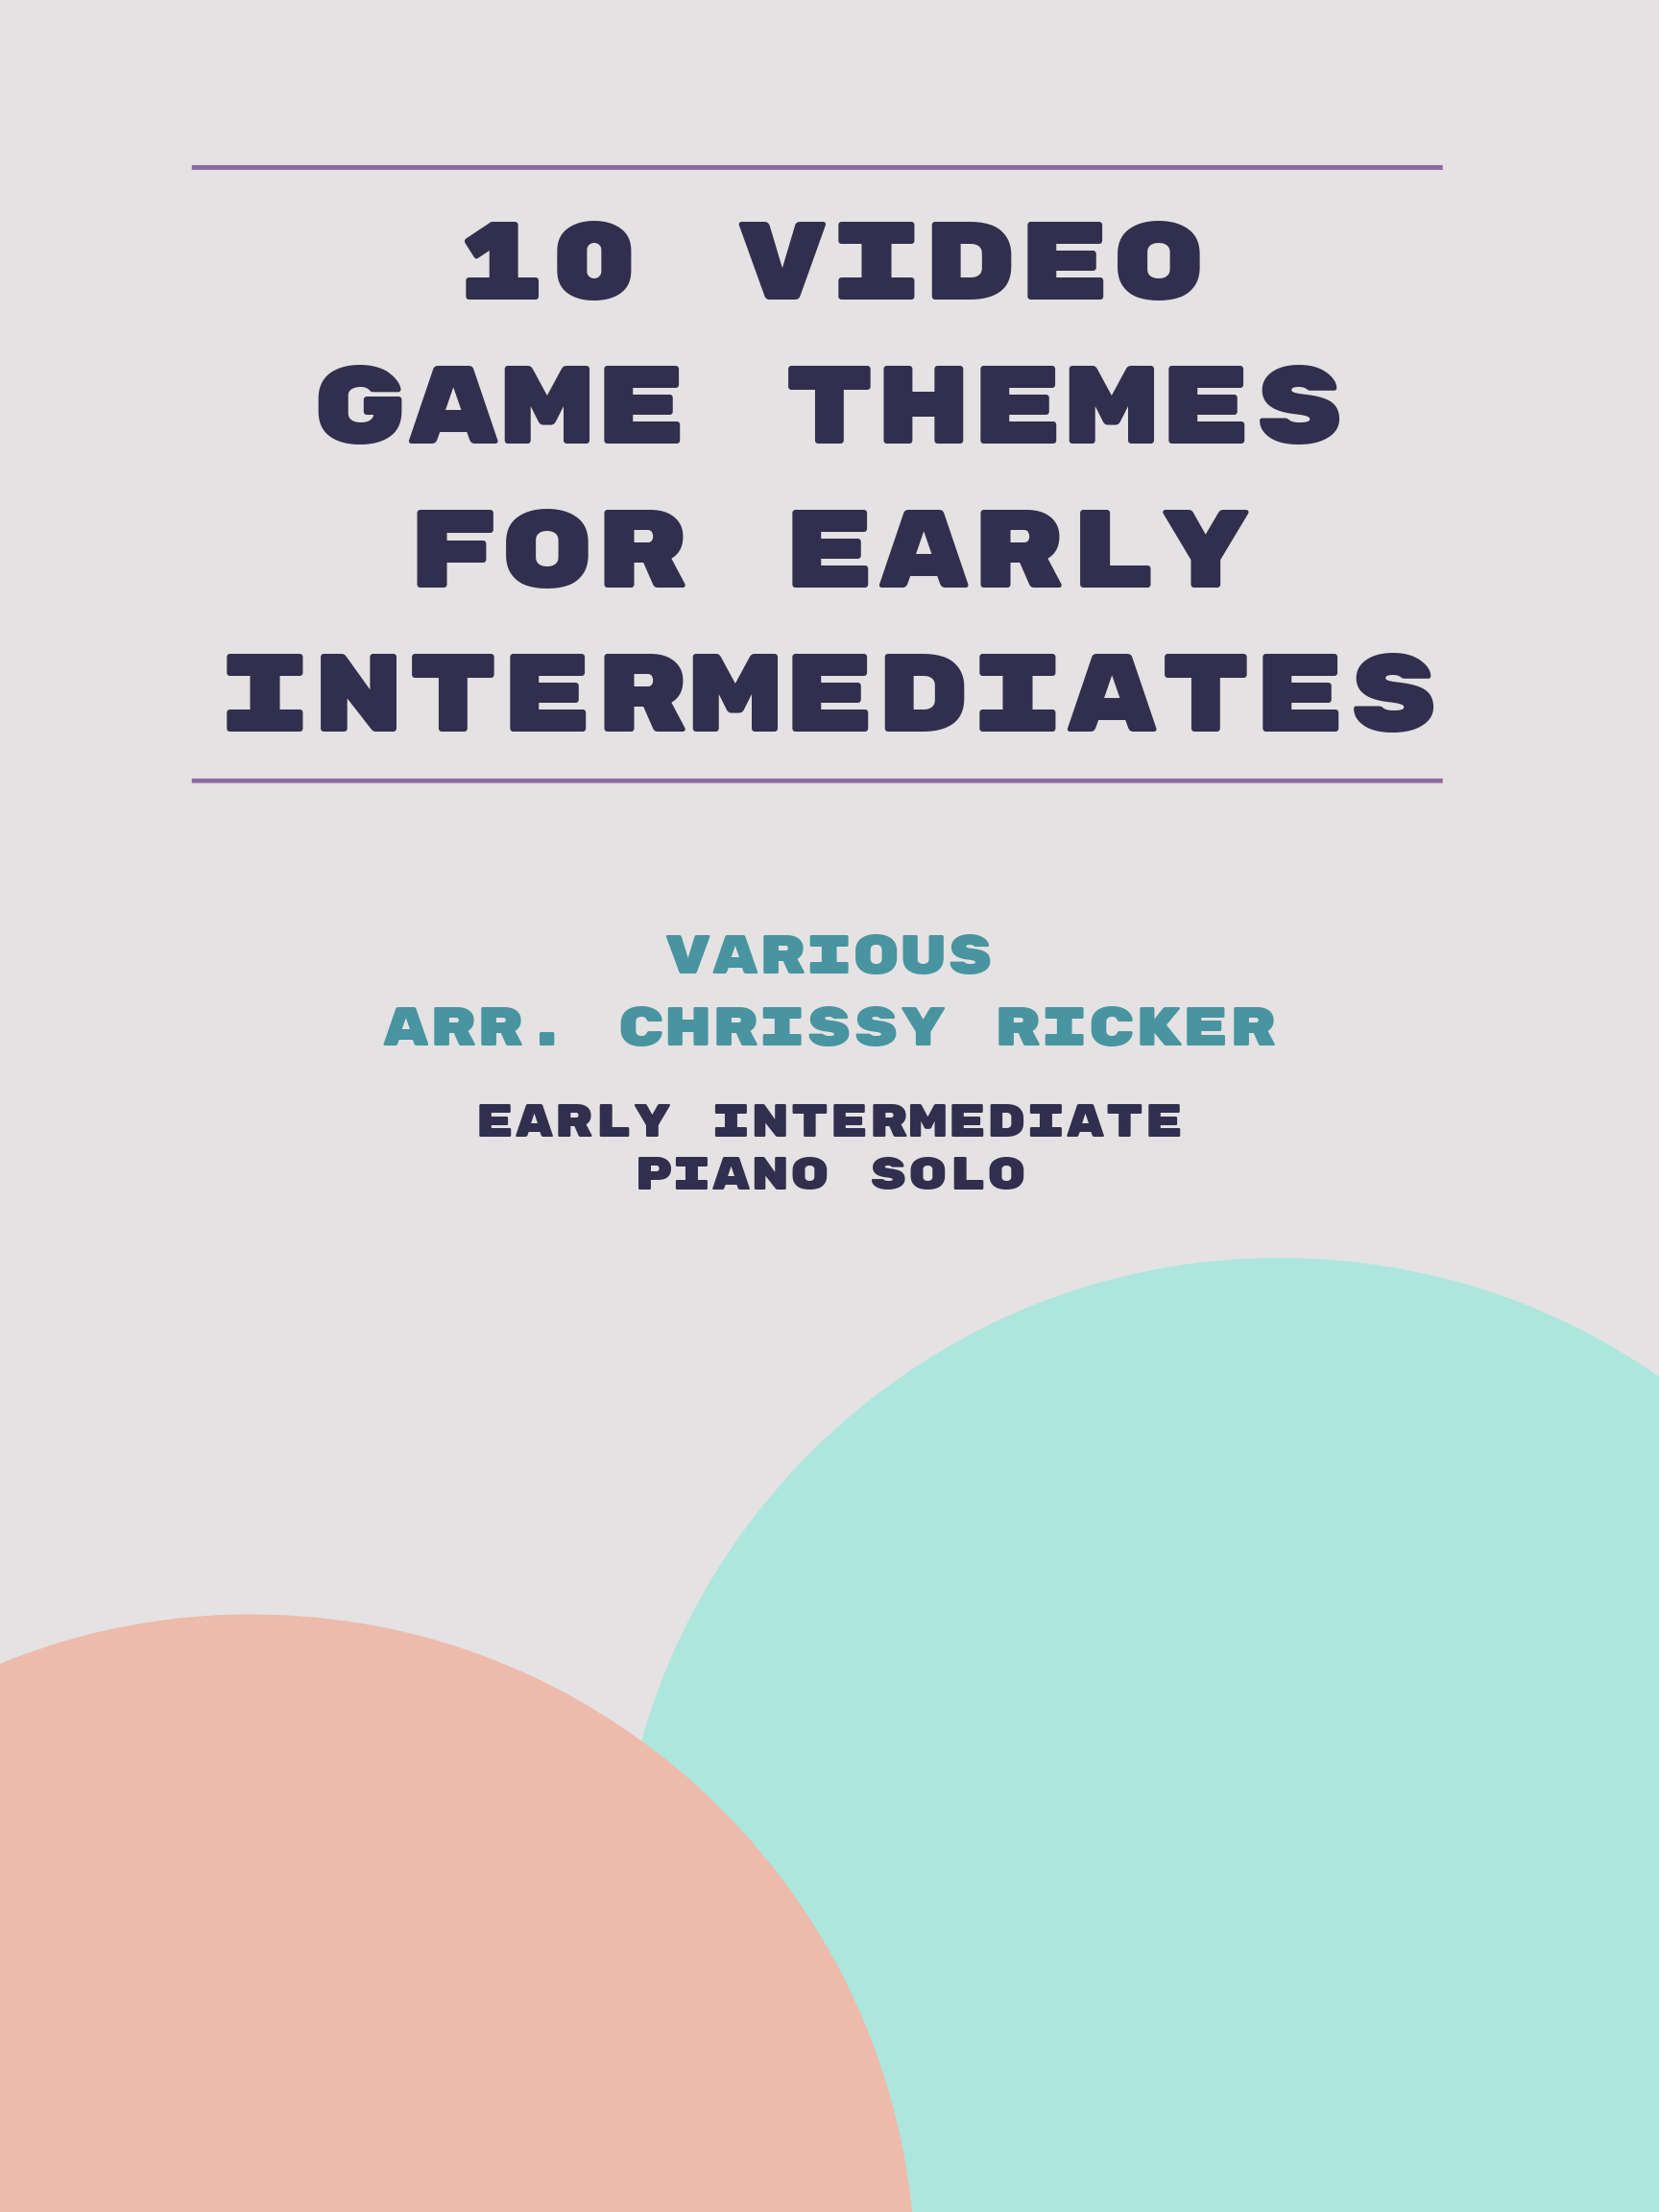 10 Video Game Themes for Early Intermediates by Various